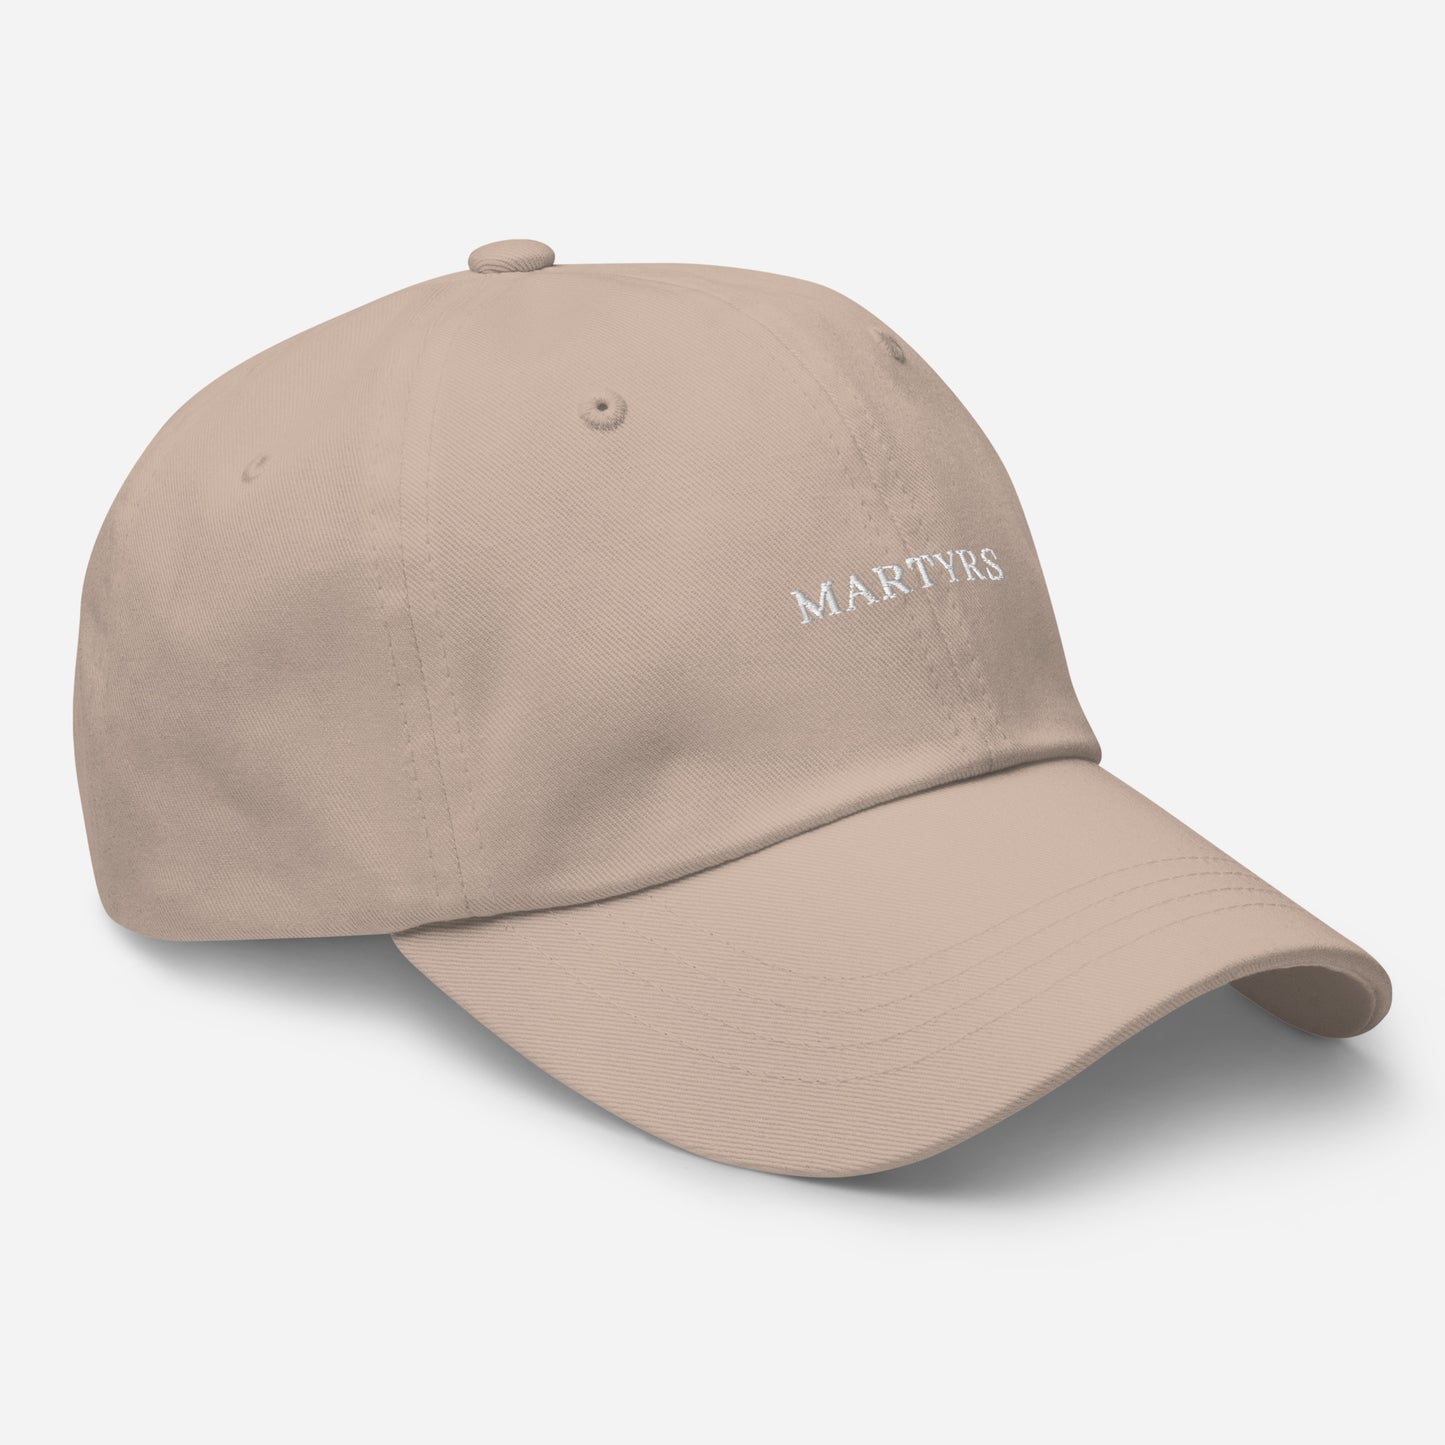 Martyrs - STONE Classic Dad hat - WHITE FONT embroidery